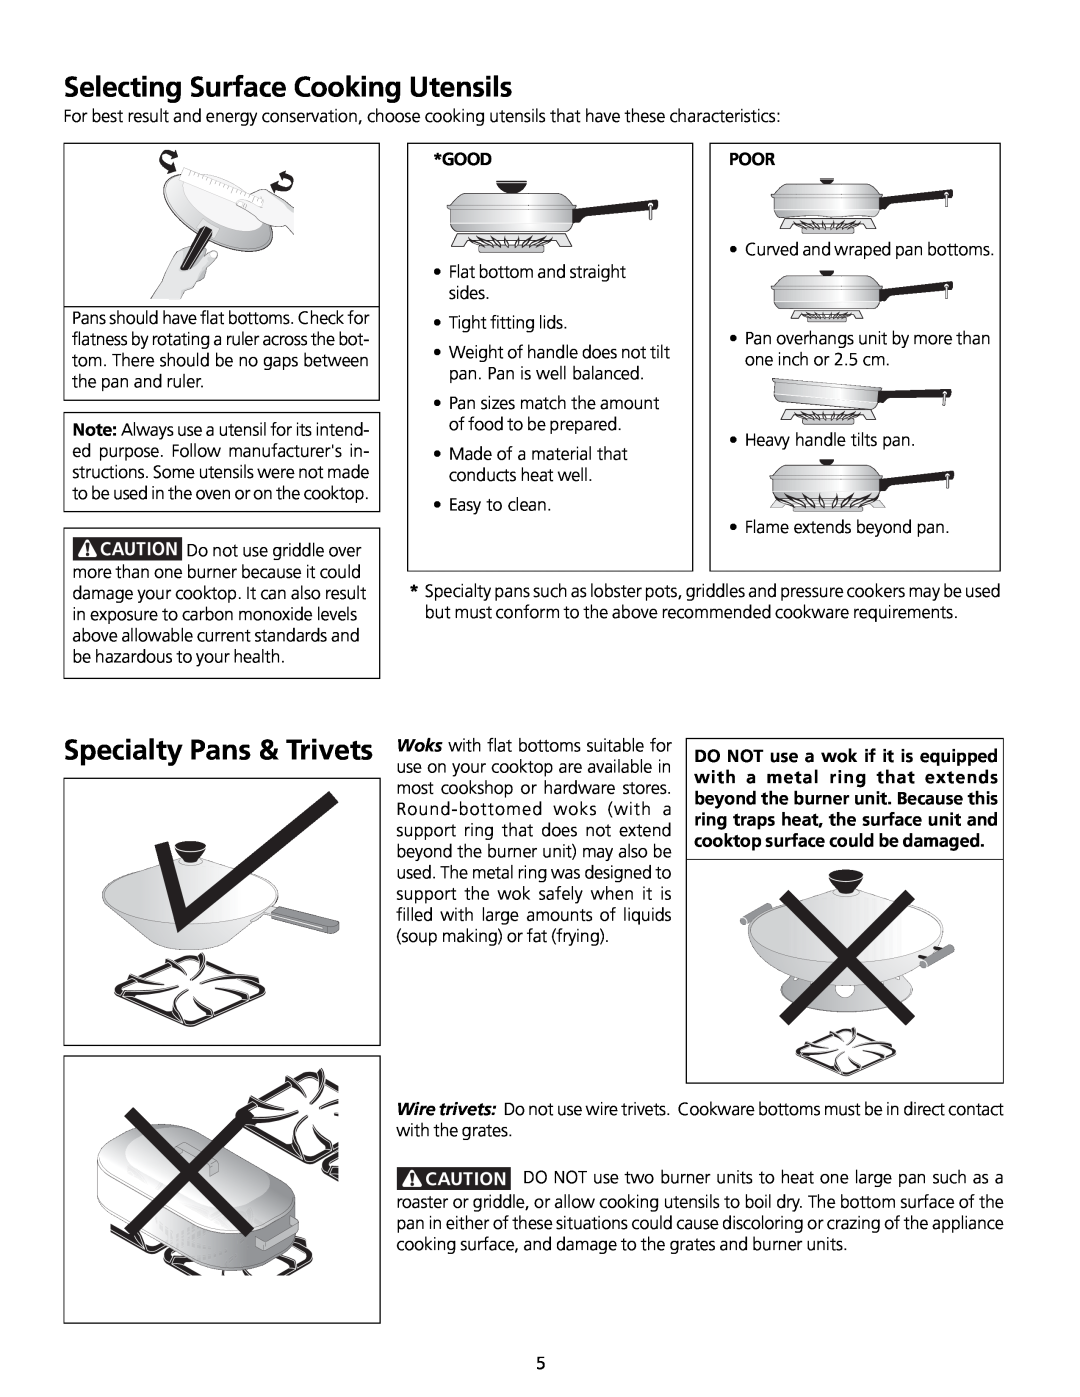 Frigidaire 318200563 important safety instructions Selecting Surface Cooking Utensils, Good, Poor 